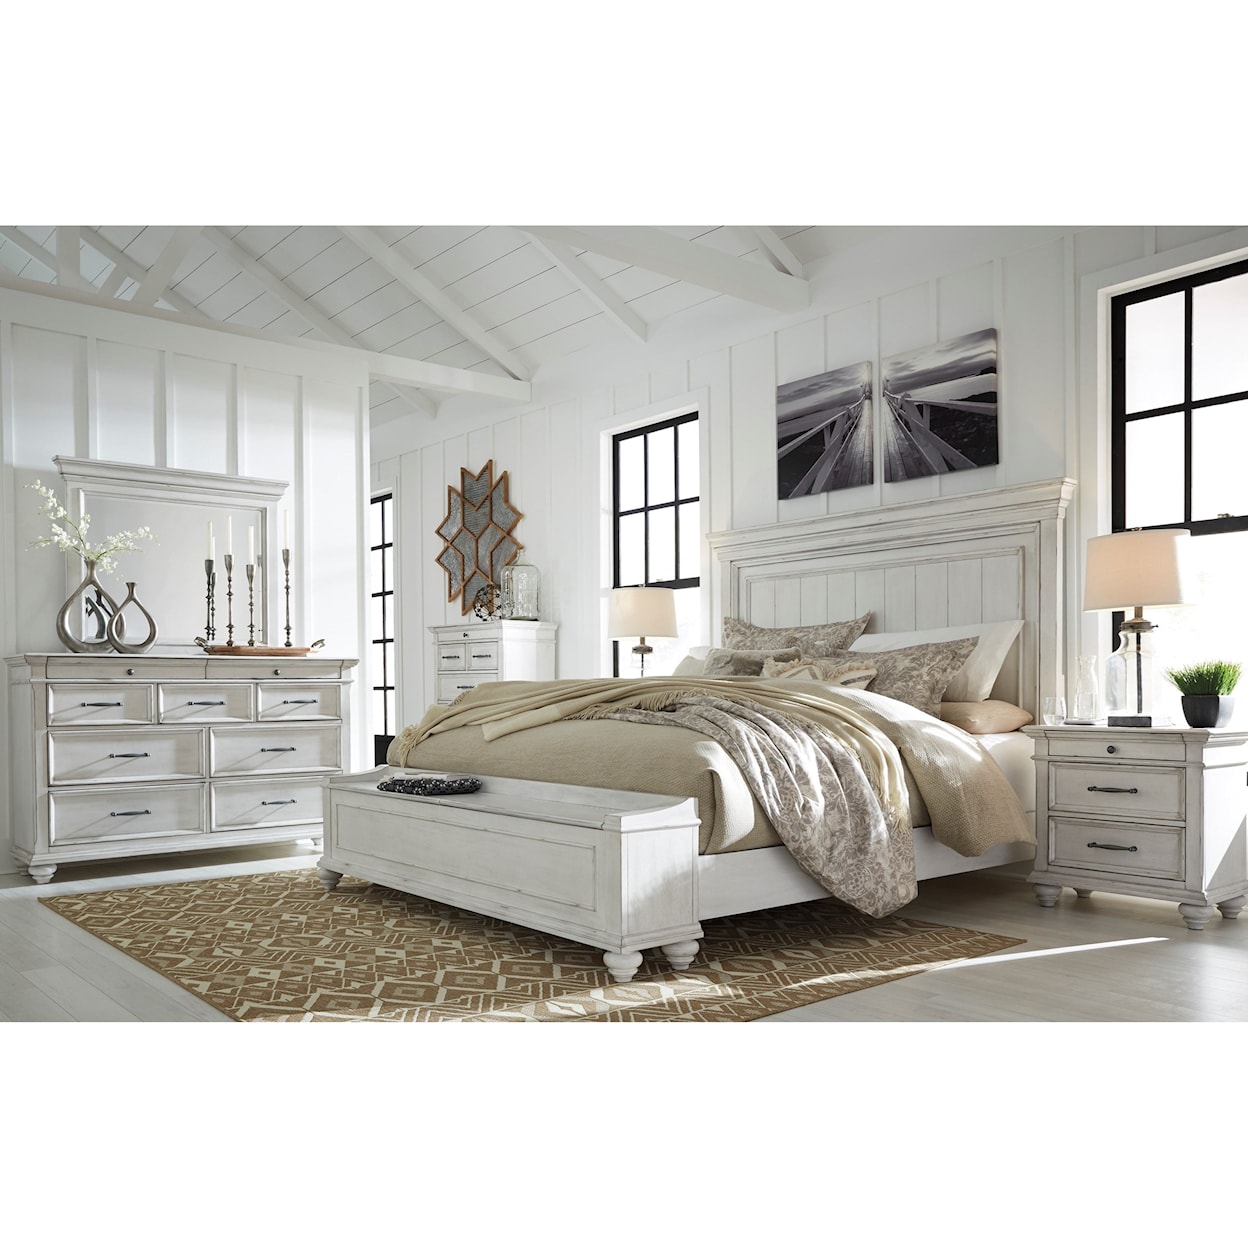 Benchcraft by Ashley Kanwyn Queen Bedroom Group